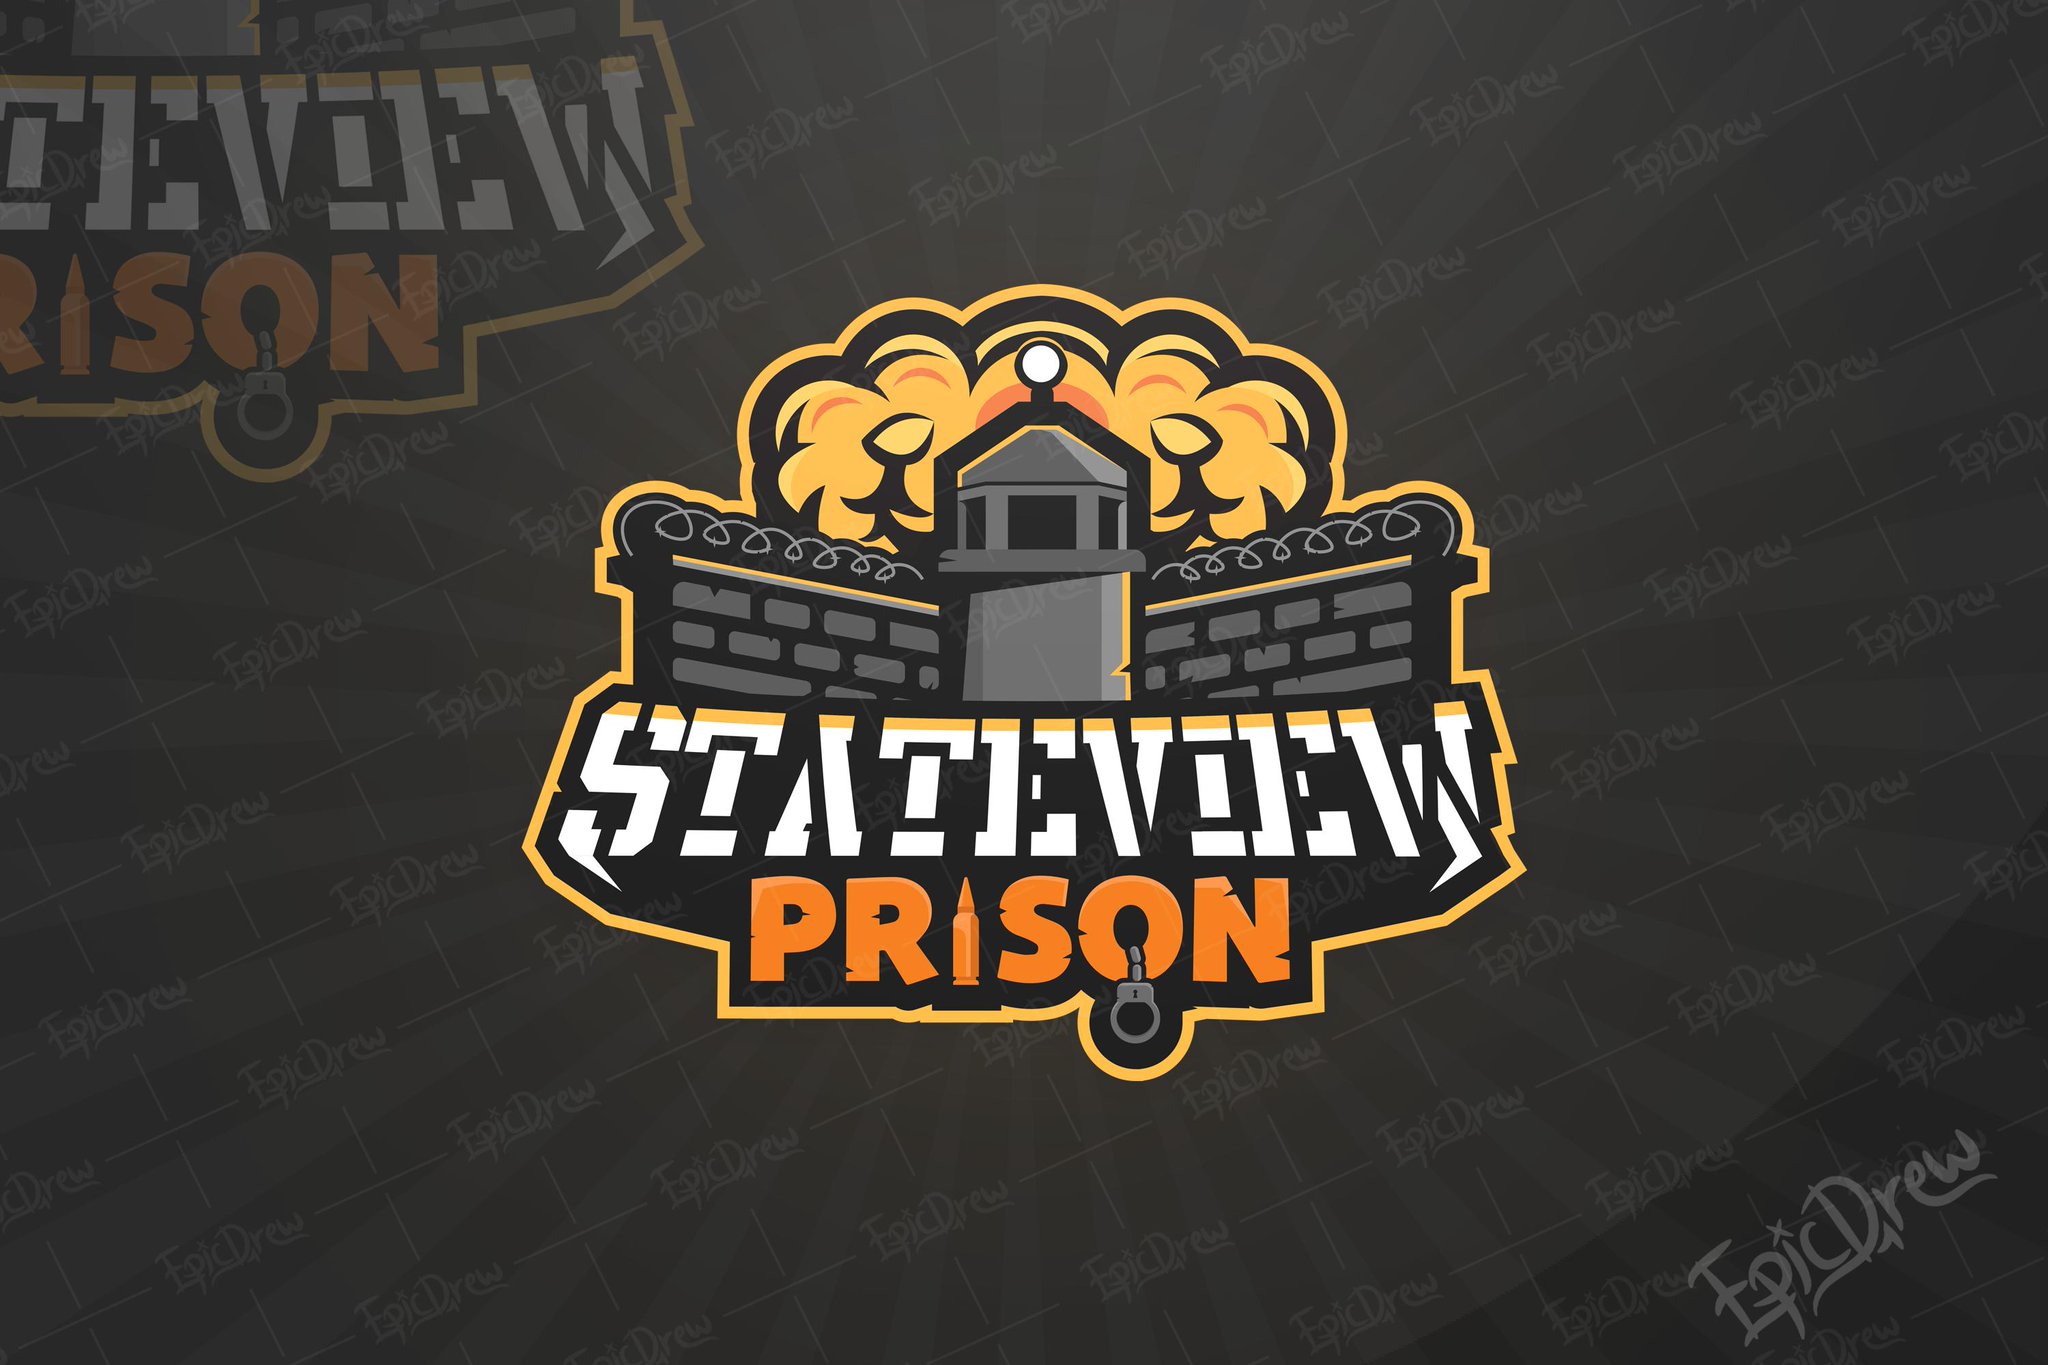 Ep1cdrew On Twitter Break Out Commission Logo For The Game Stateview Prison Had A Lot Of Fun Making This S Rt S Appreciated Robloxdev Roblox Known Members Devs Stateviewrblx Https T Co Bpeo0gooqf - stateview prison roblox